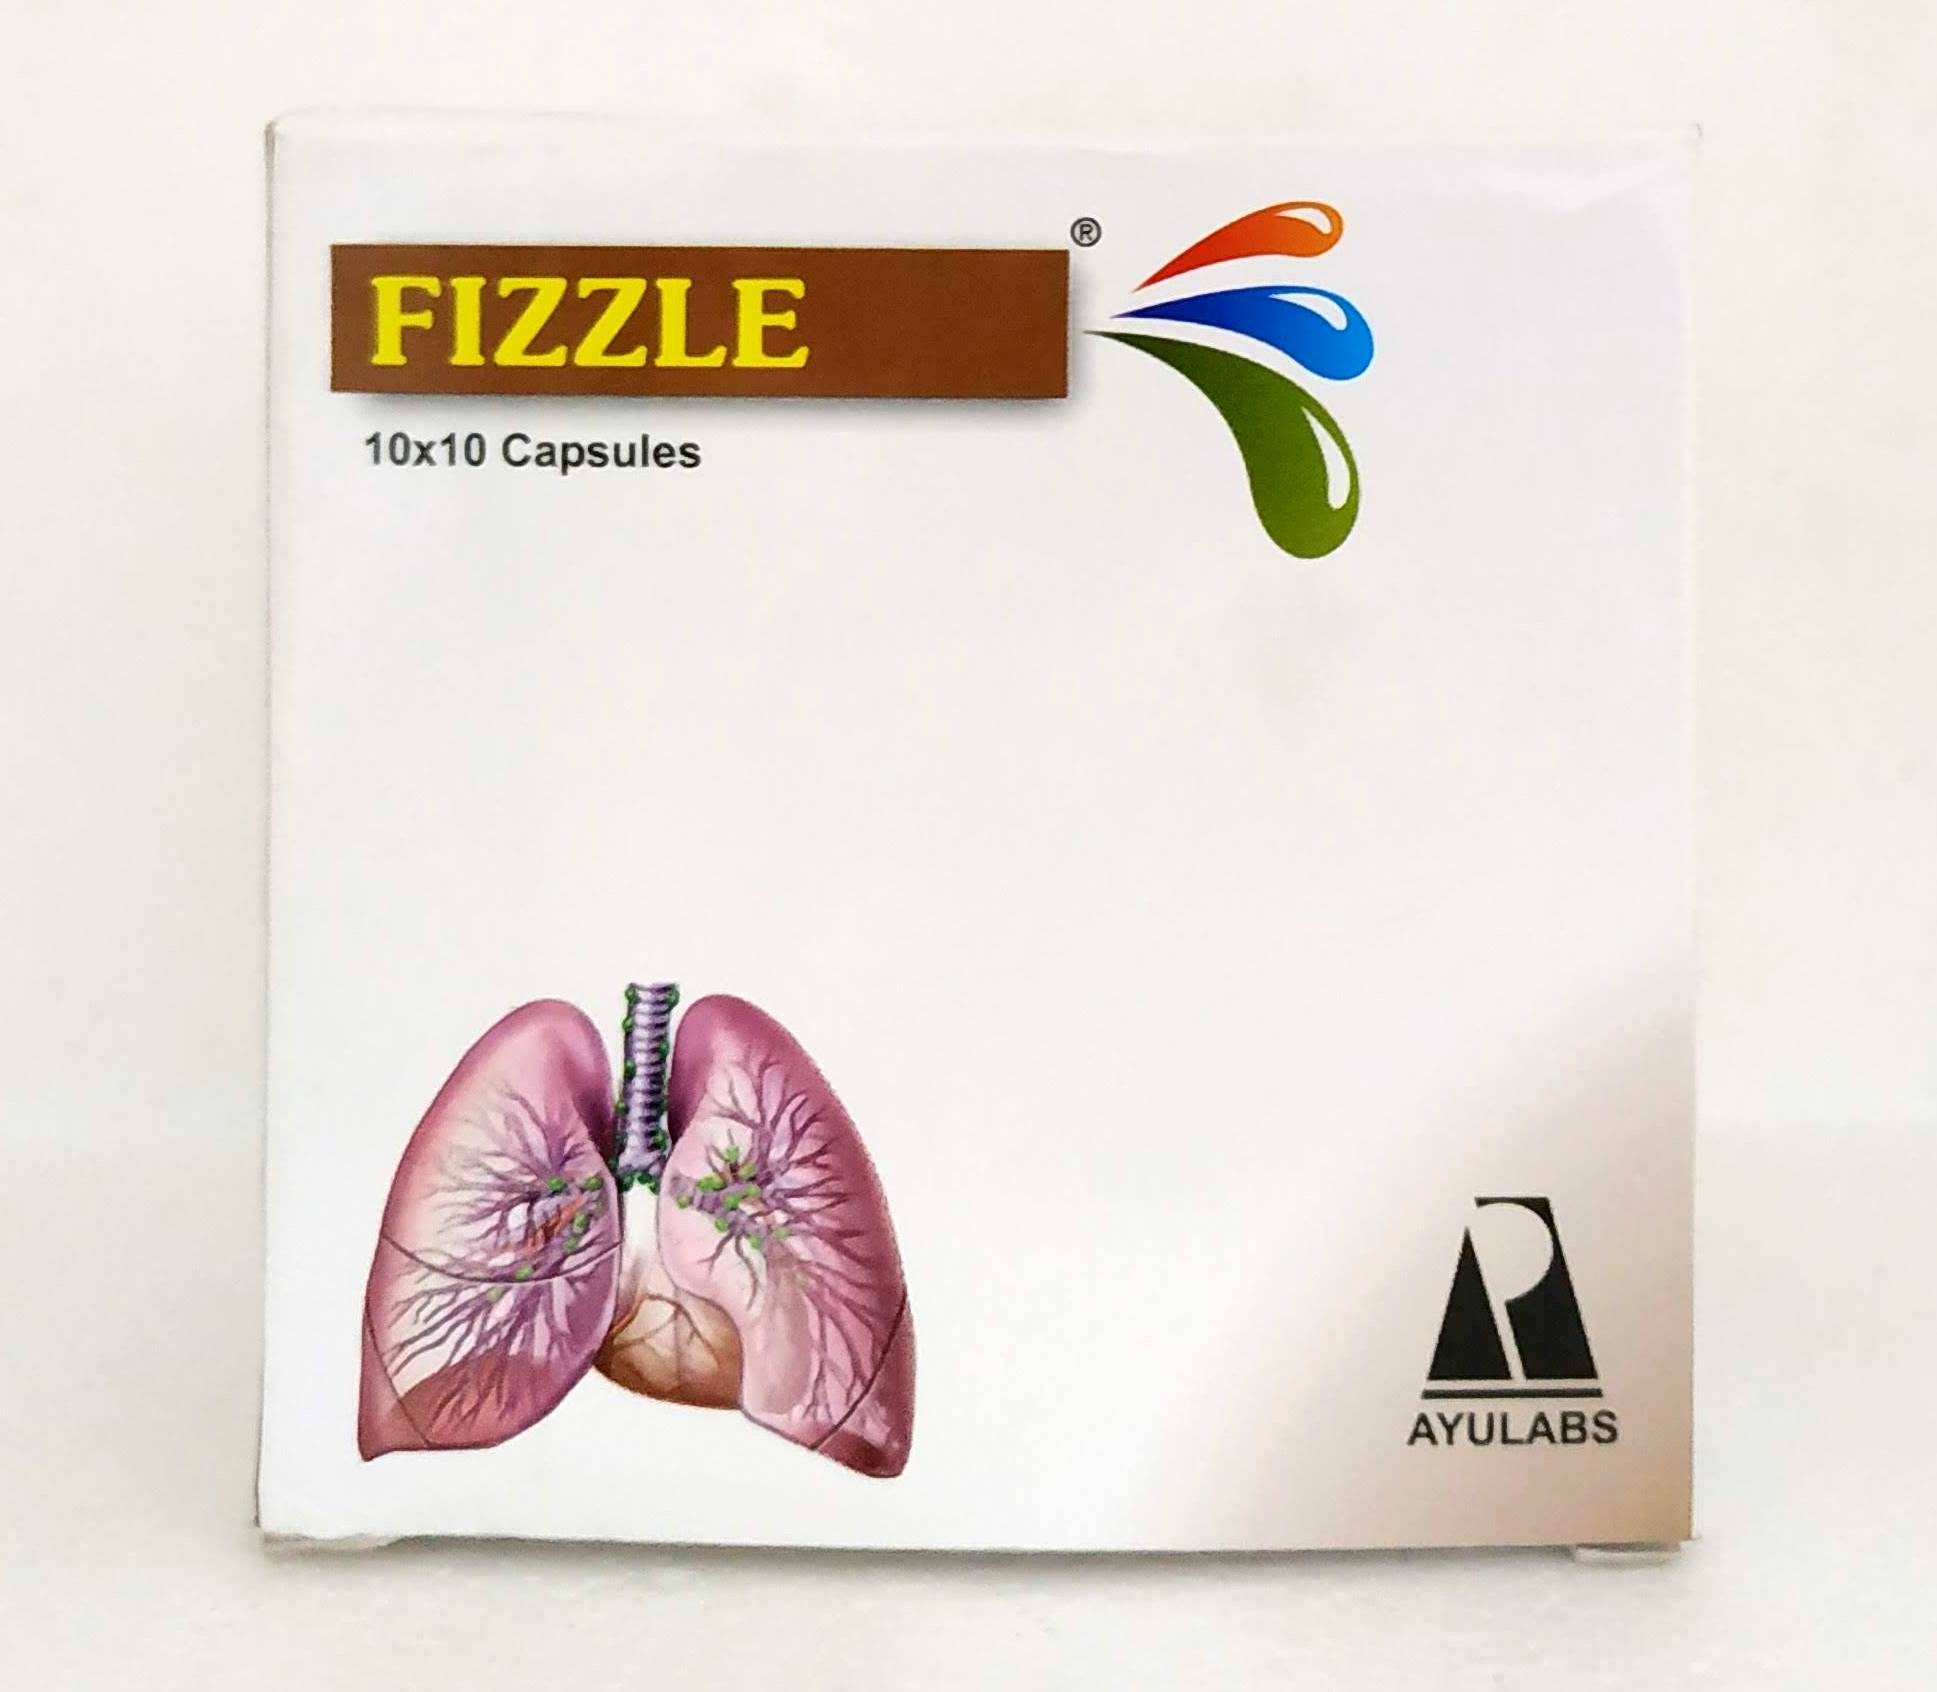 Shop Fizzle Capsules - 10Capsules at price 45.00 from Ayulabs Online - Ayush Care